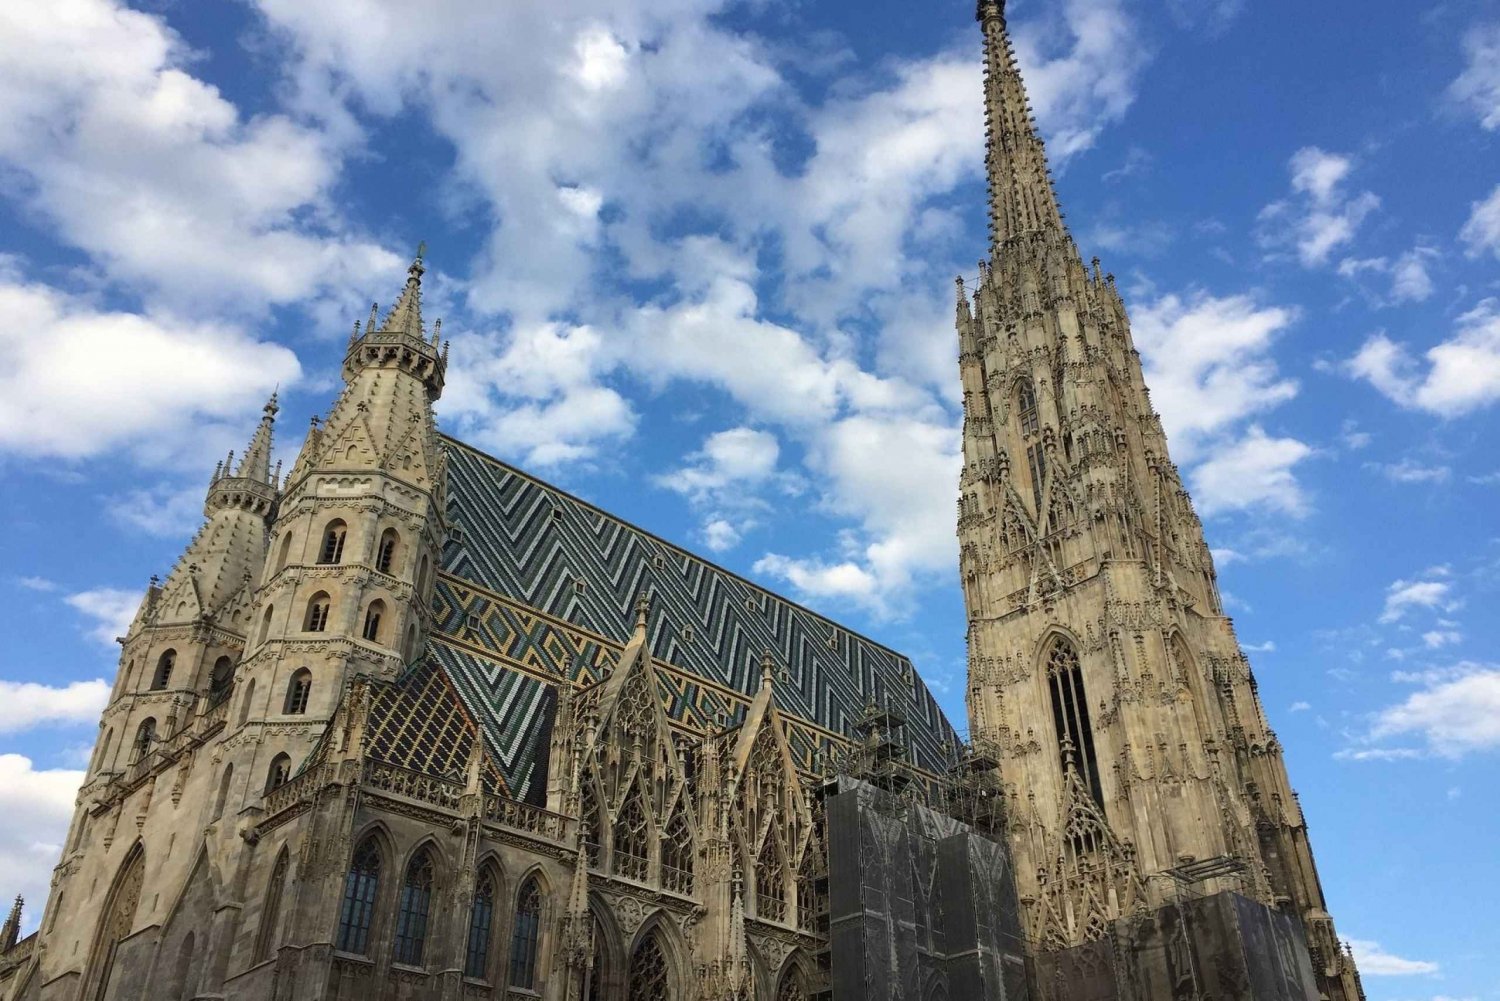 Vienna 3-Hour Walking Tour: City of Many Pasts